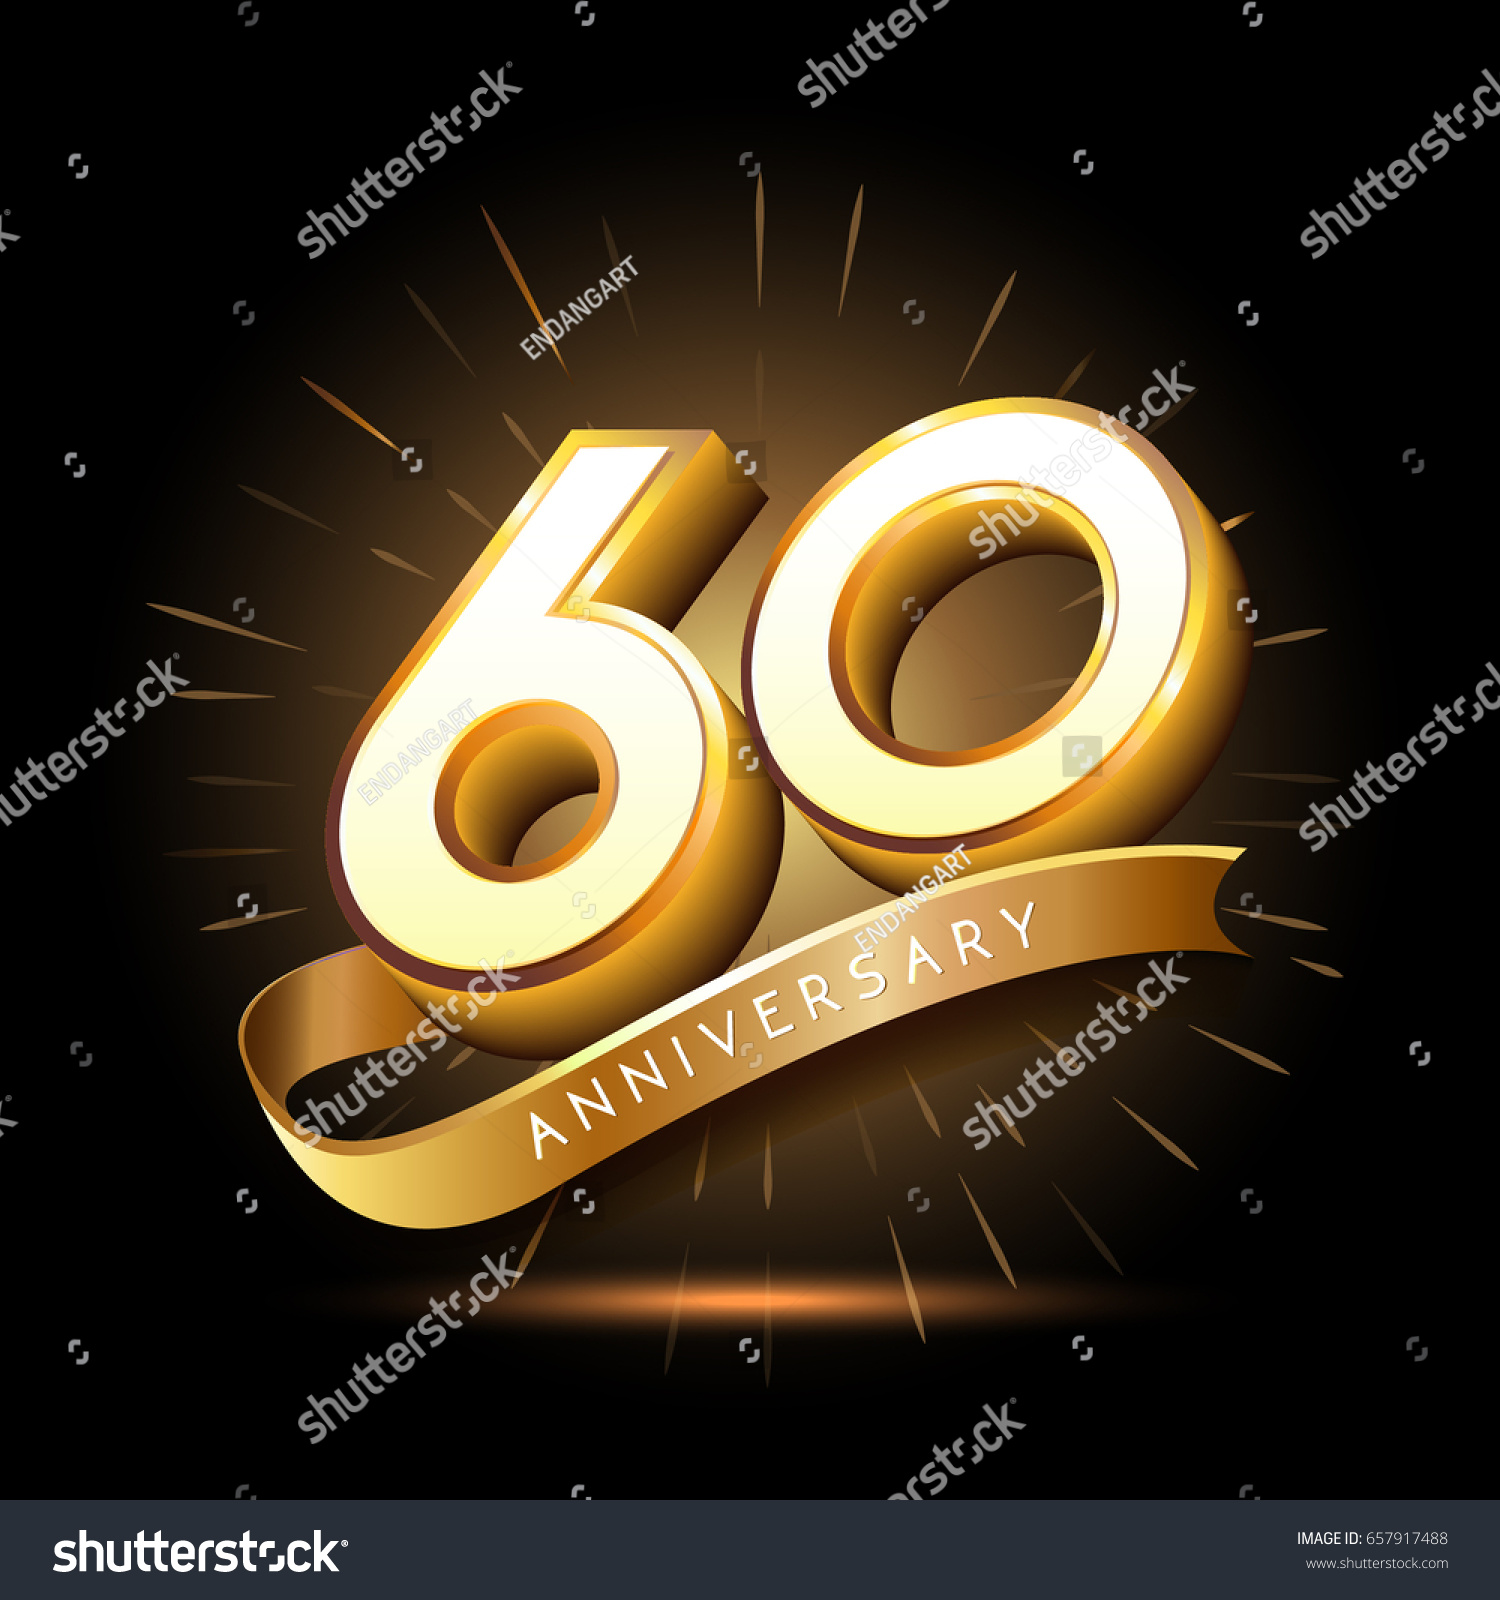 SVG of 60 years golden anniversary logo celebration with firework and ribbon svg